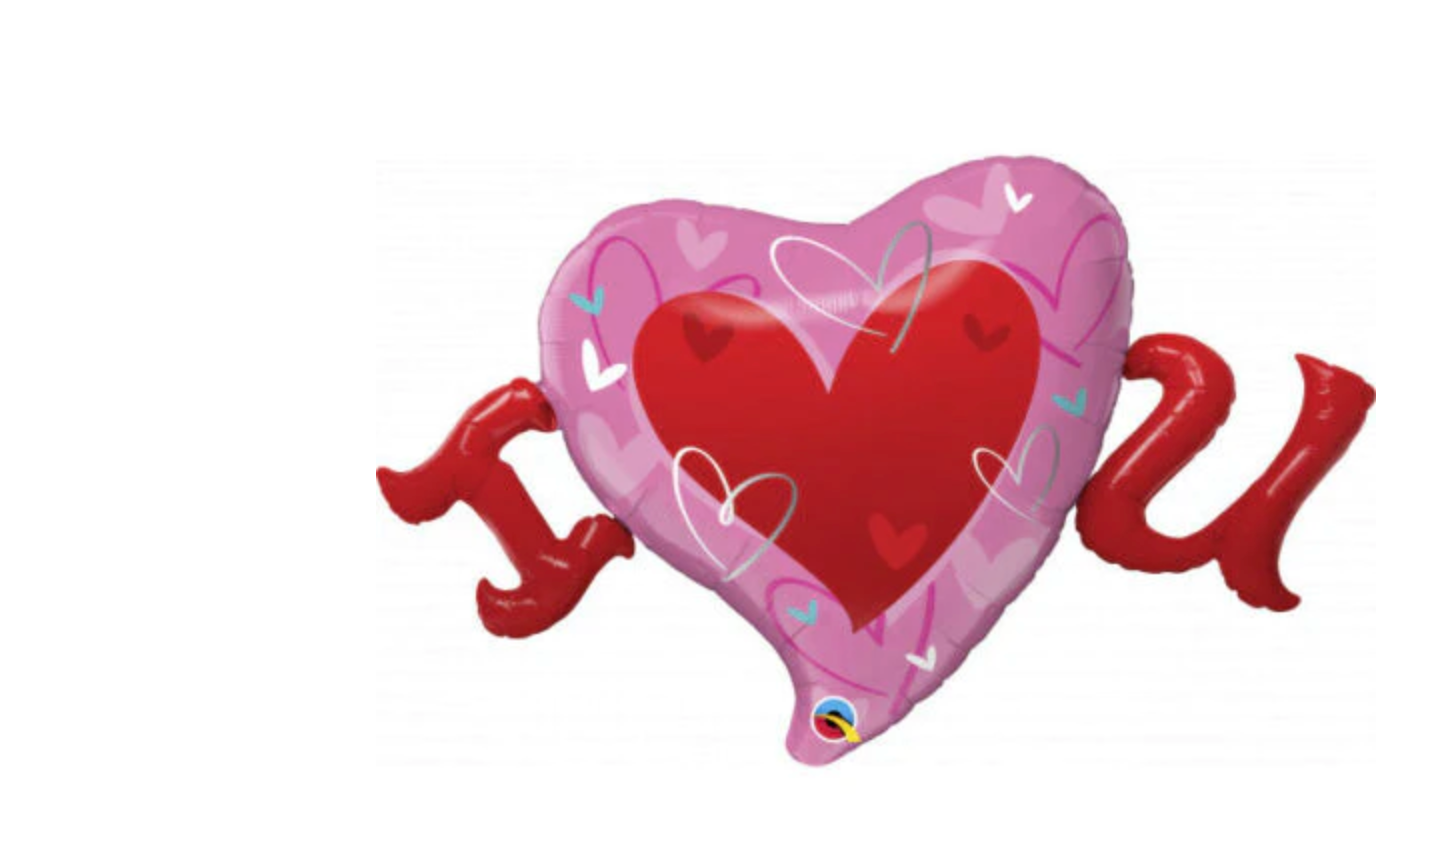 Foil Balloon Love You Red Heart 46inch